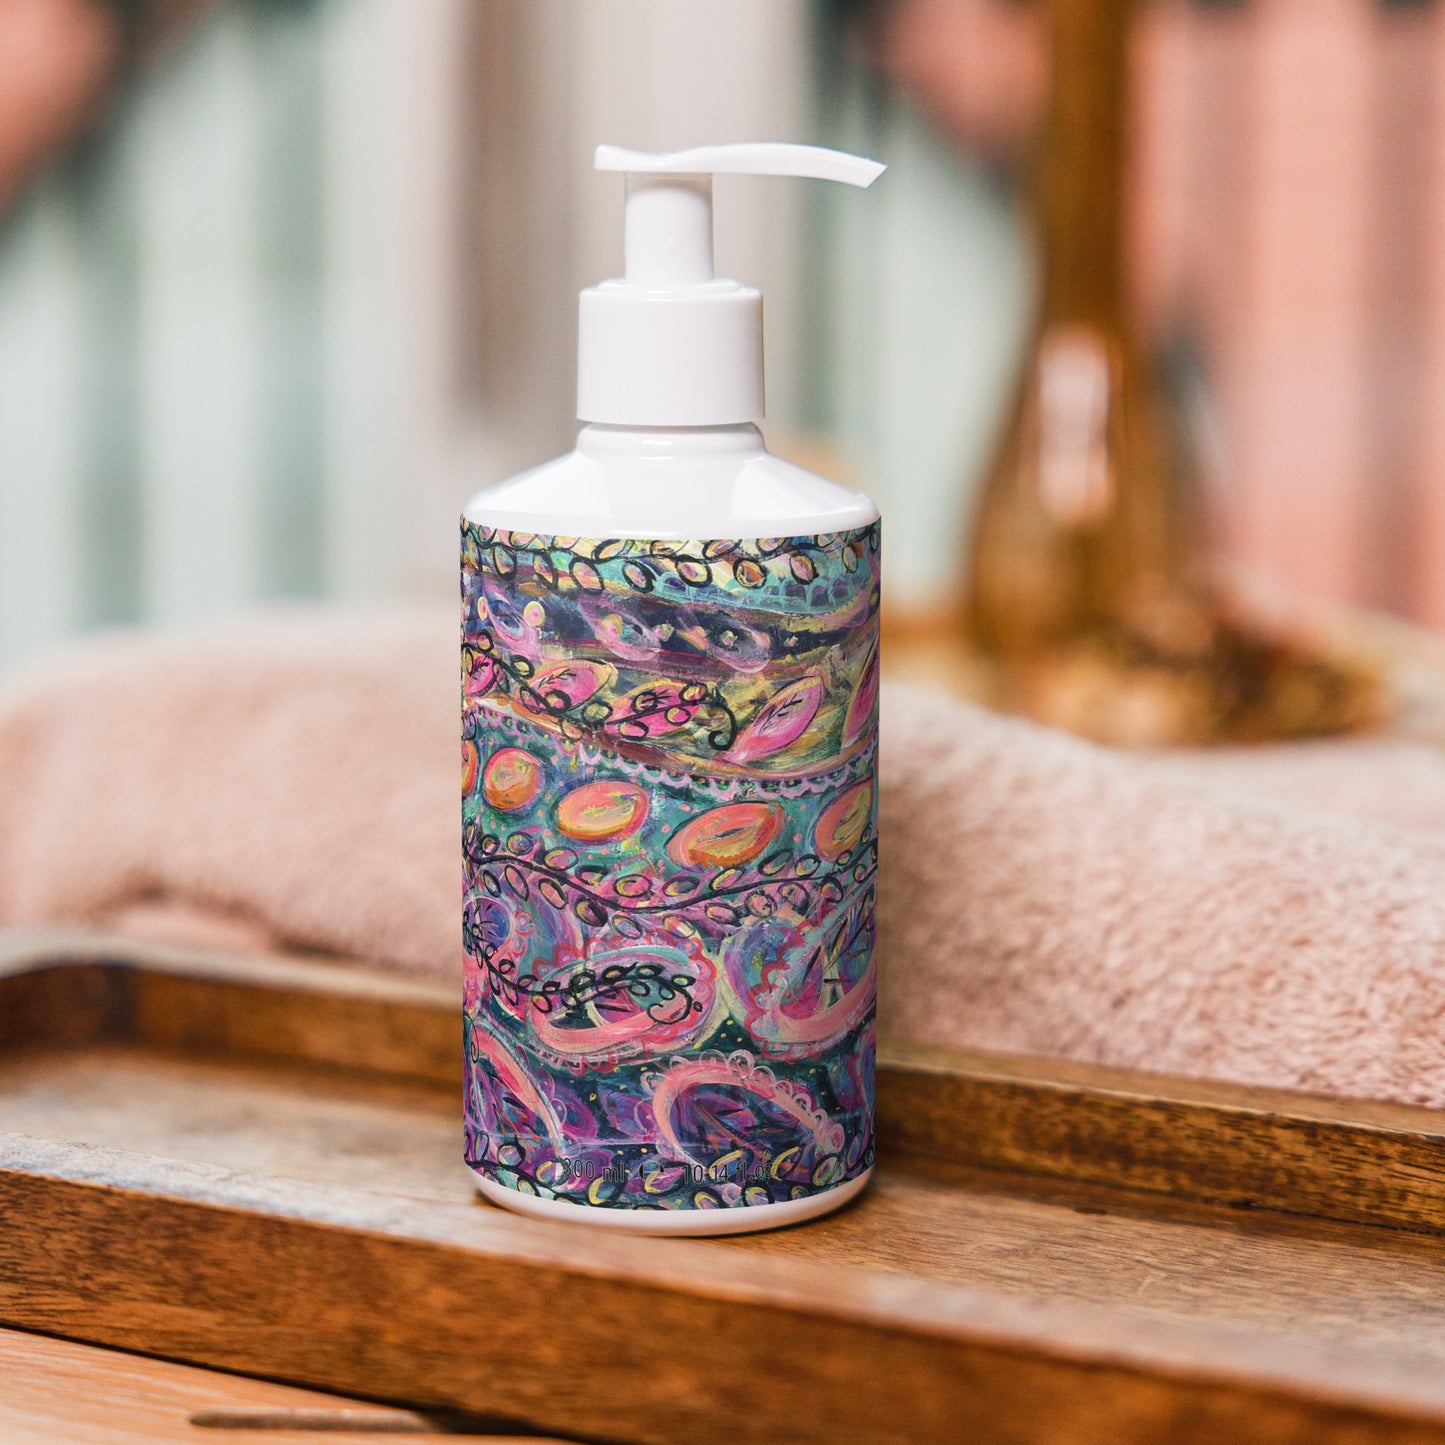 Find The Magic Floral hand & body wash